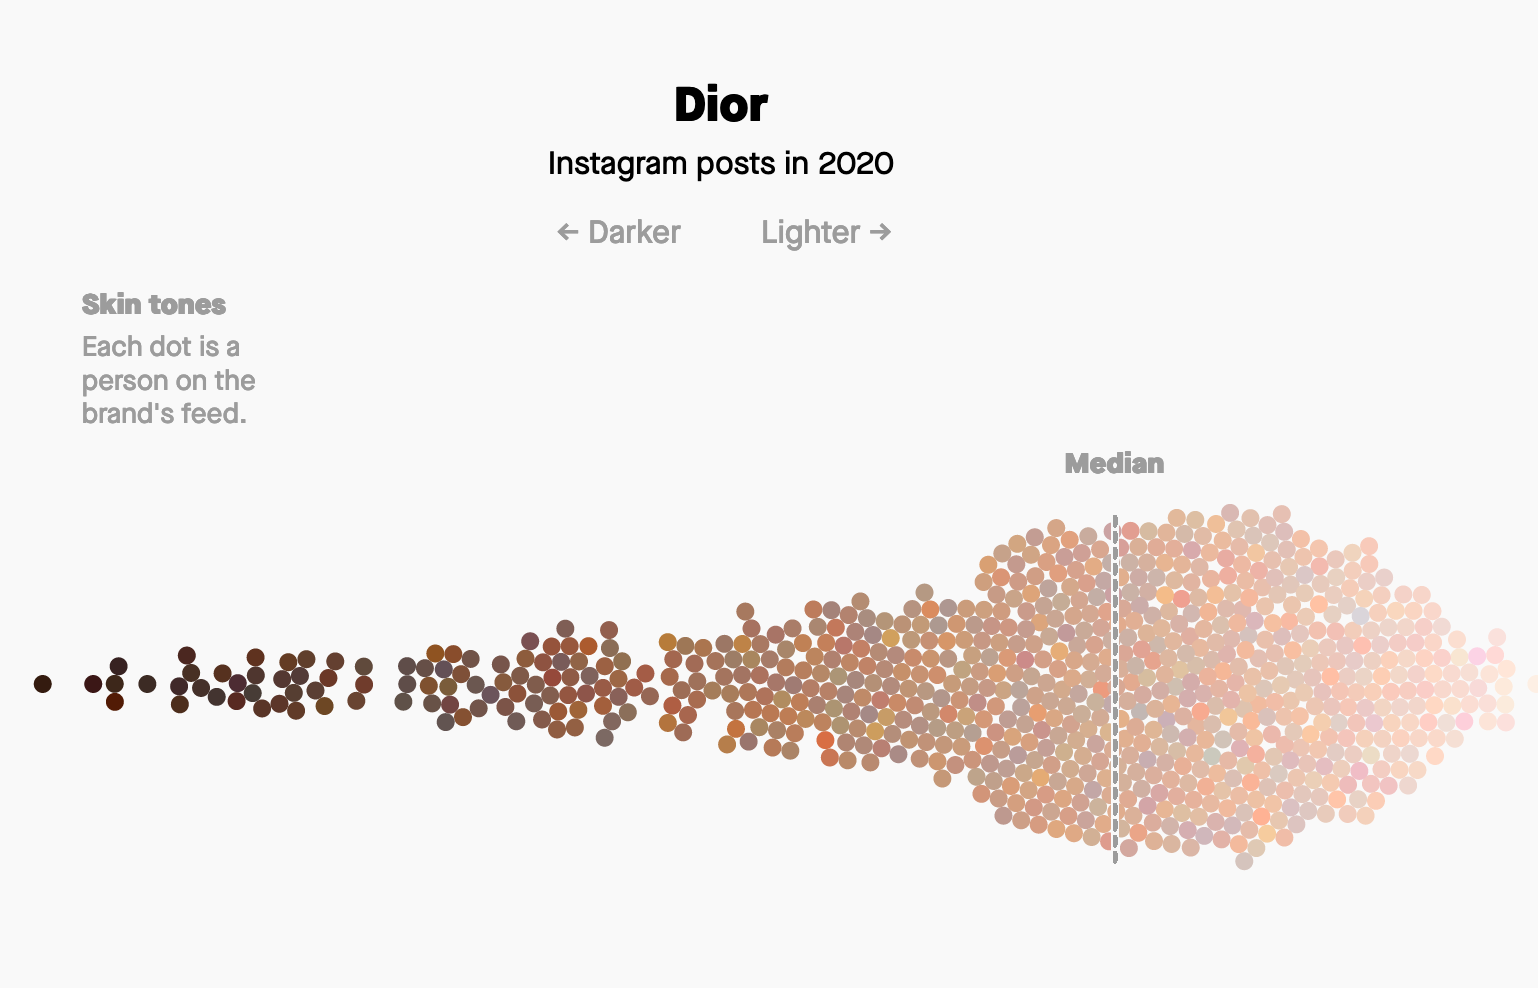 quartz data visualizations of fashion brands use of skin color in instagram posts